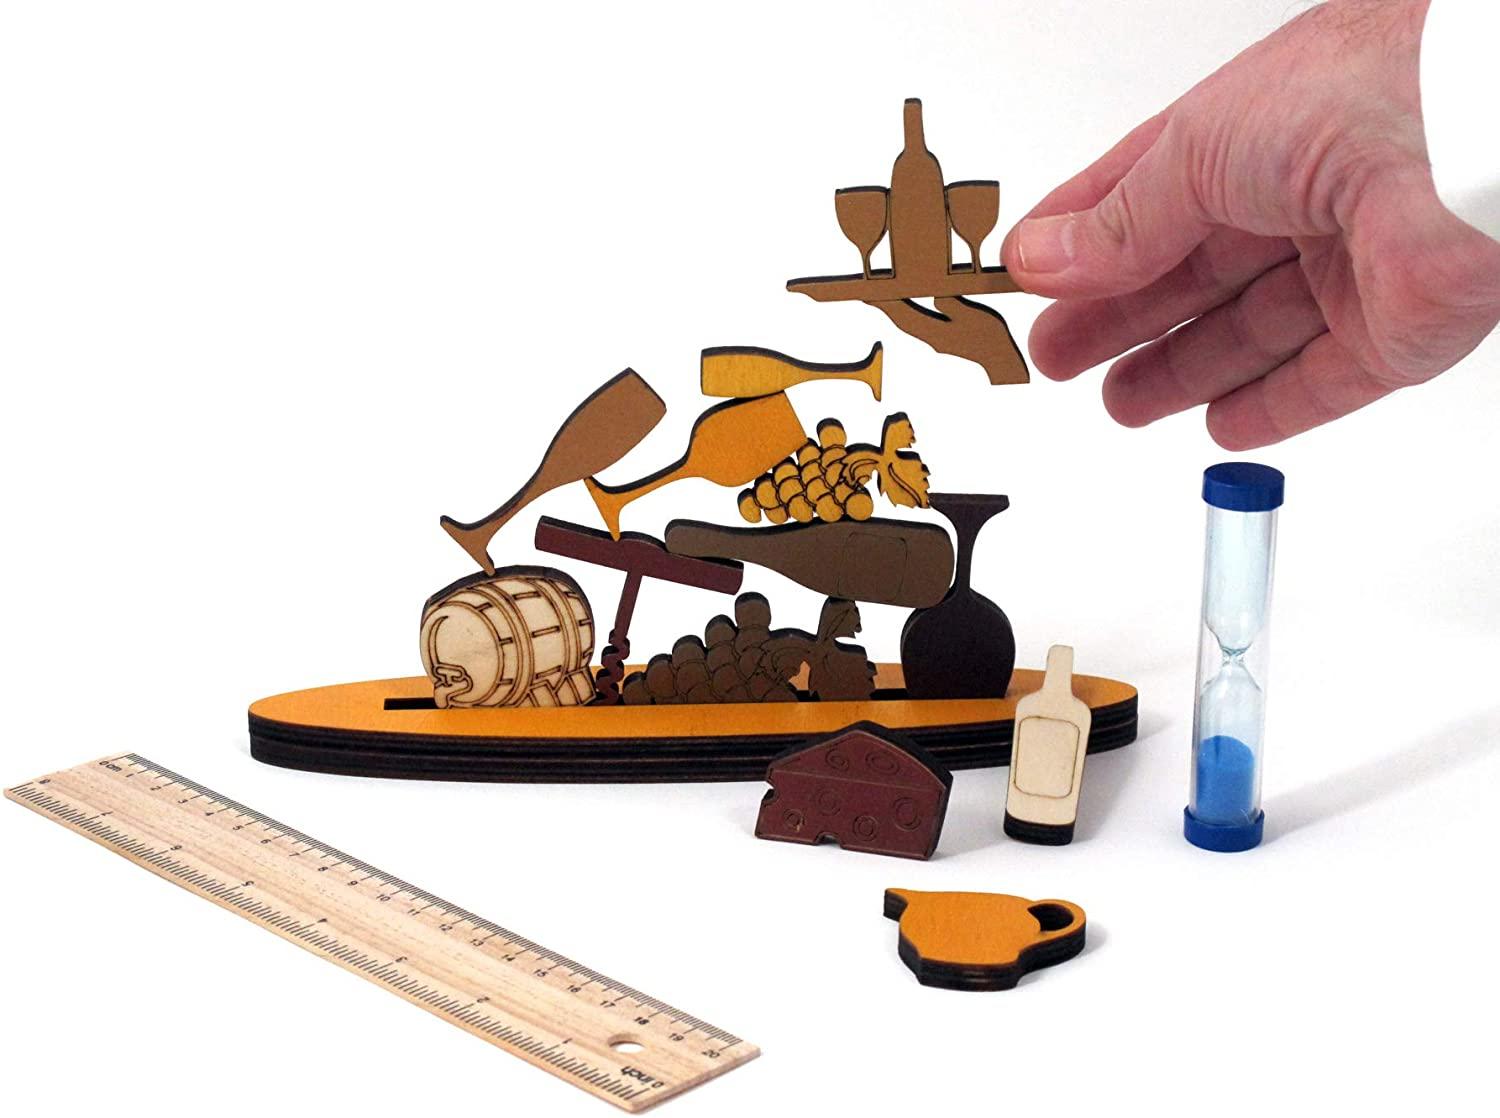 Wooden stacking Monkey Business puzzle game in manufacturer's packaging.